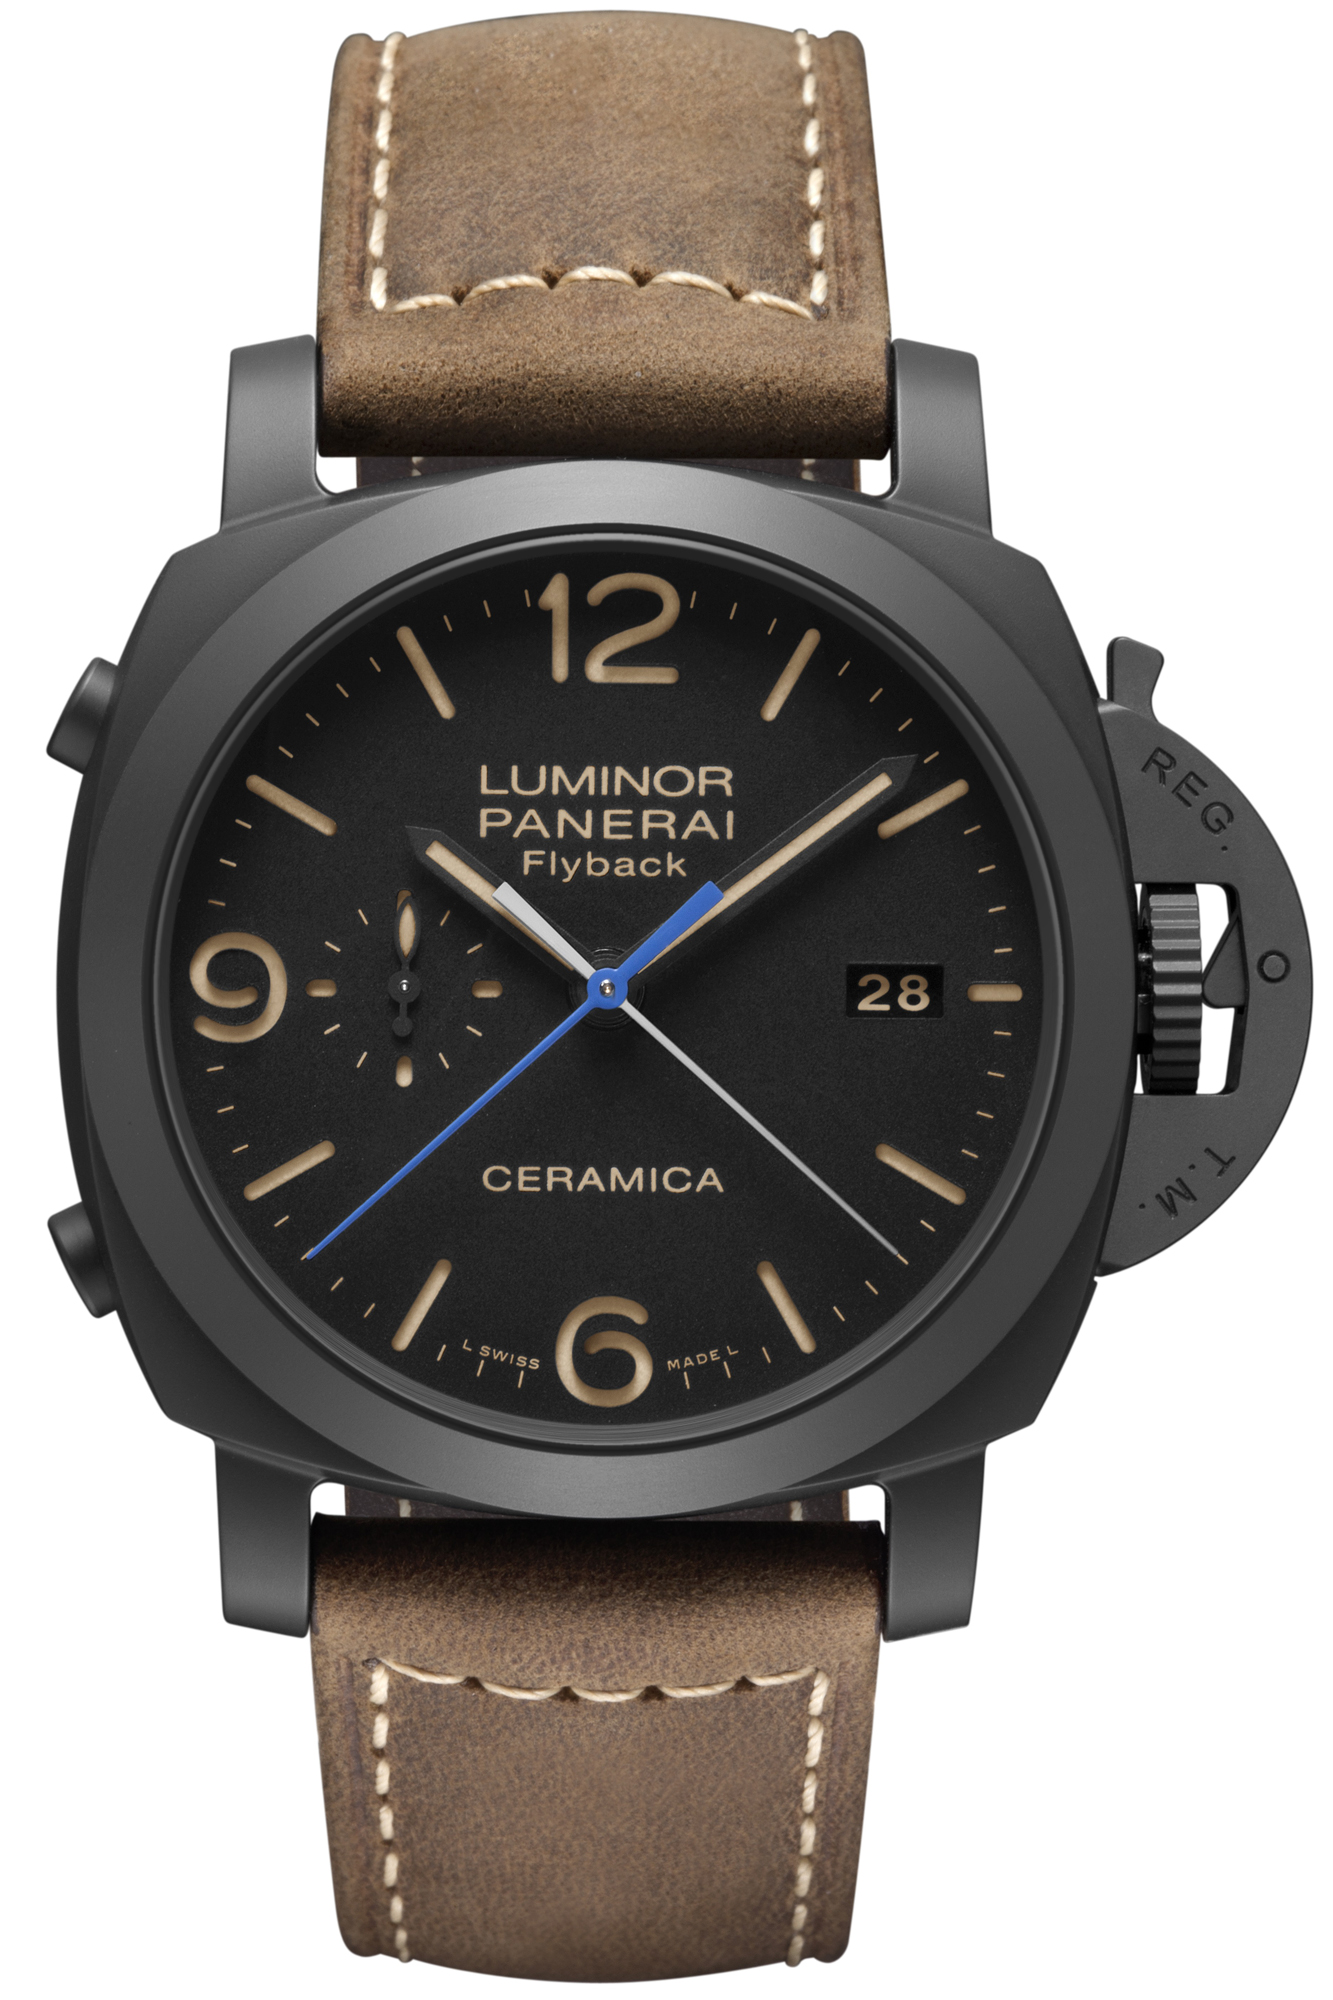 Panerai Luminor 1950 3 Days Chrono Flyback Ceramica With Central Minute Hand (PAM580